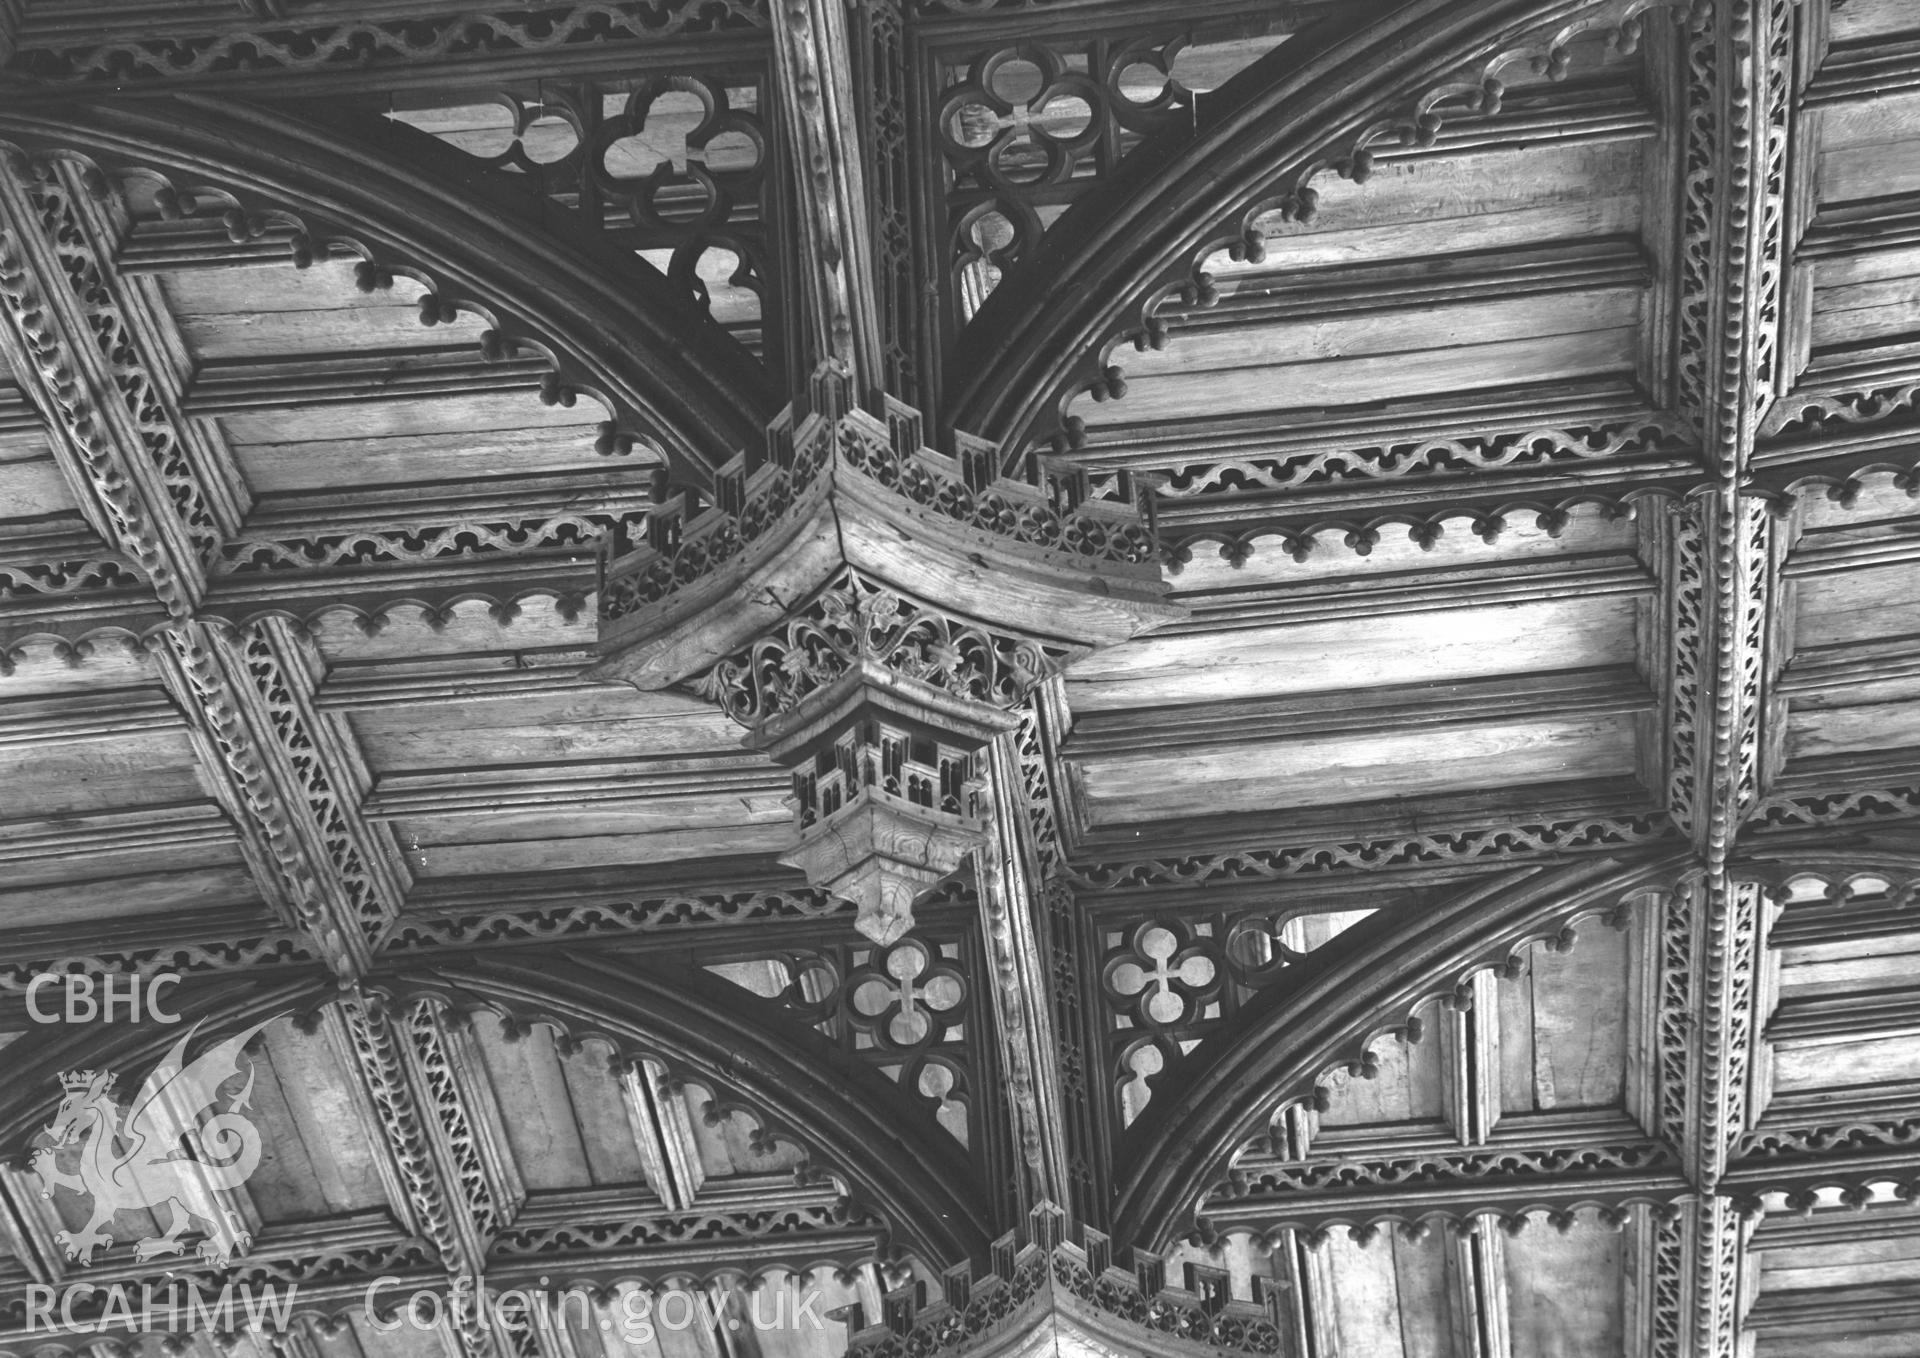 Digital copy of a black and white acetate negative showing detail of pendant ceiling at St. David's Cathedral, taken by E.W. Lovegrove, July 1936